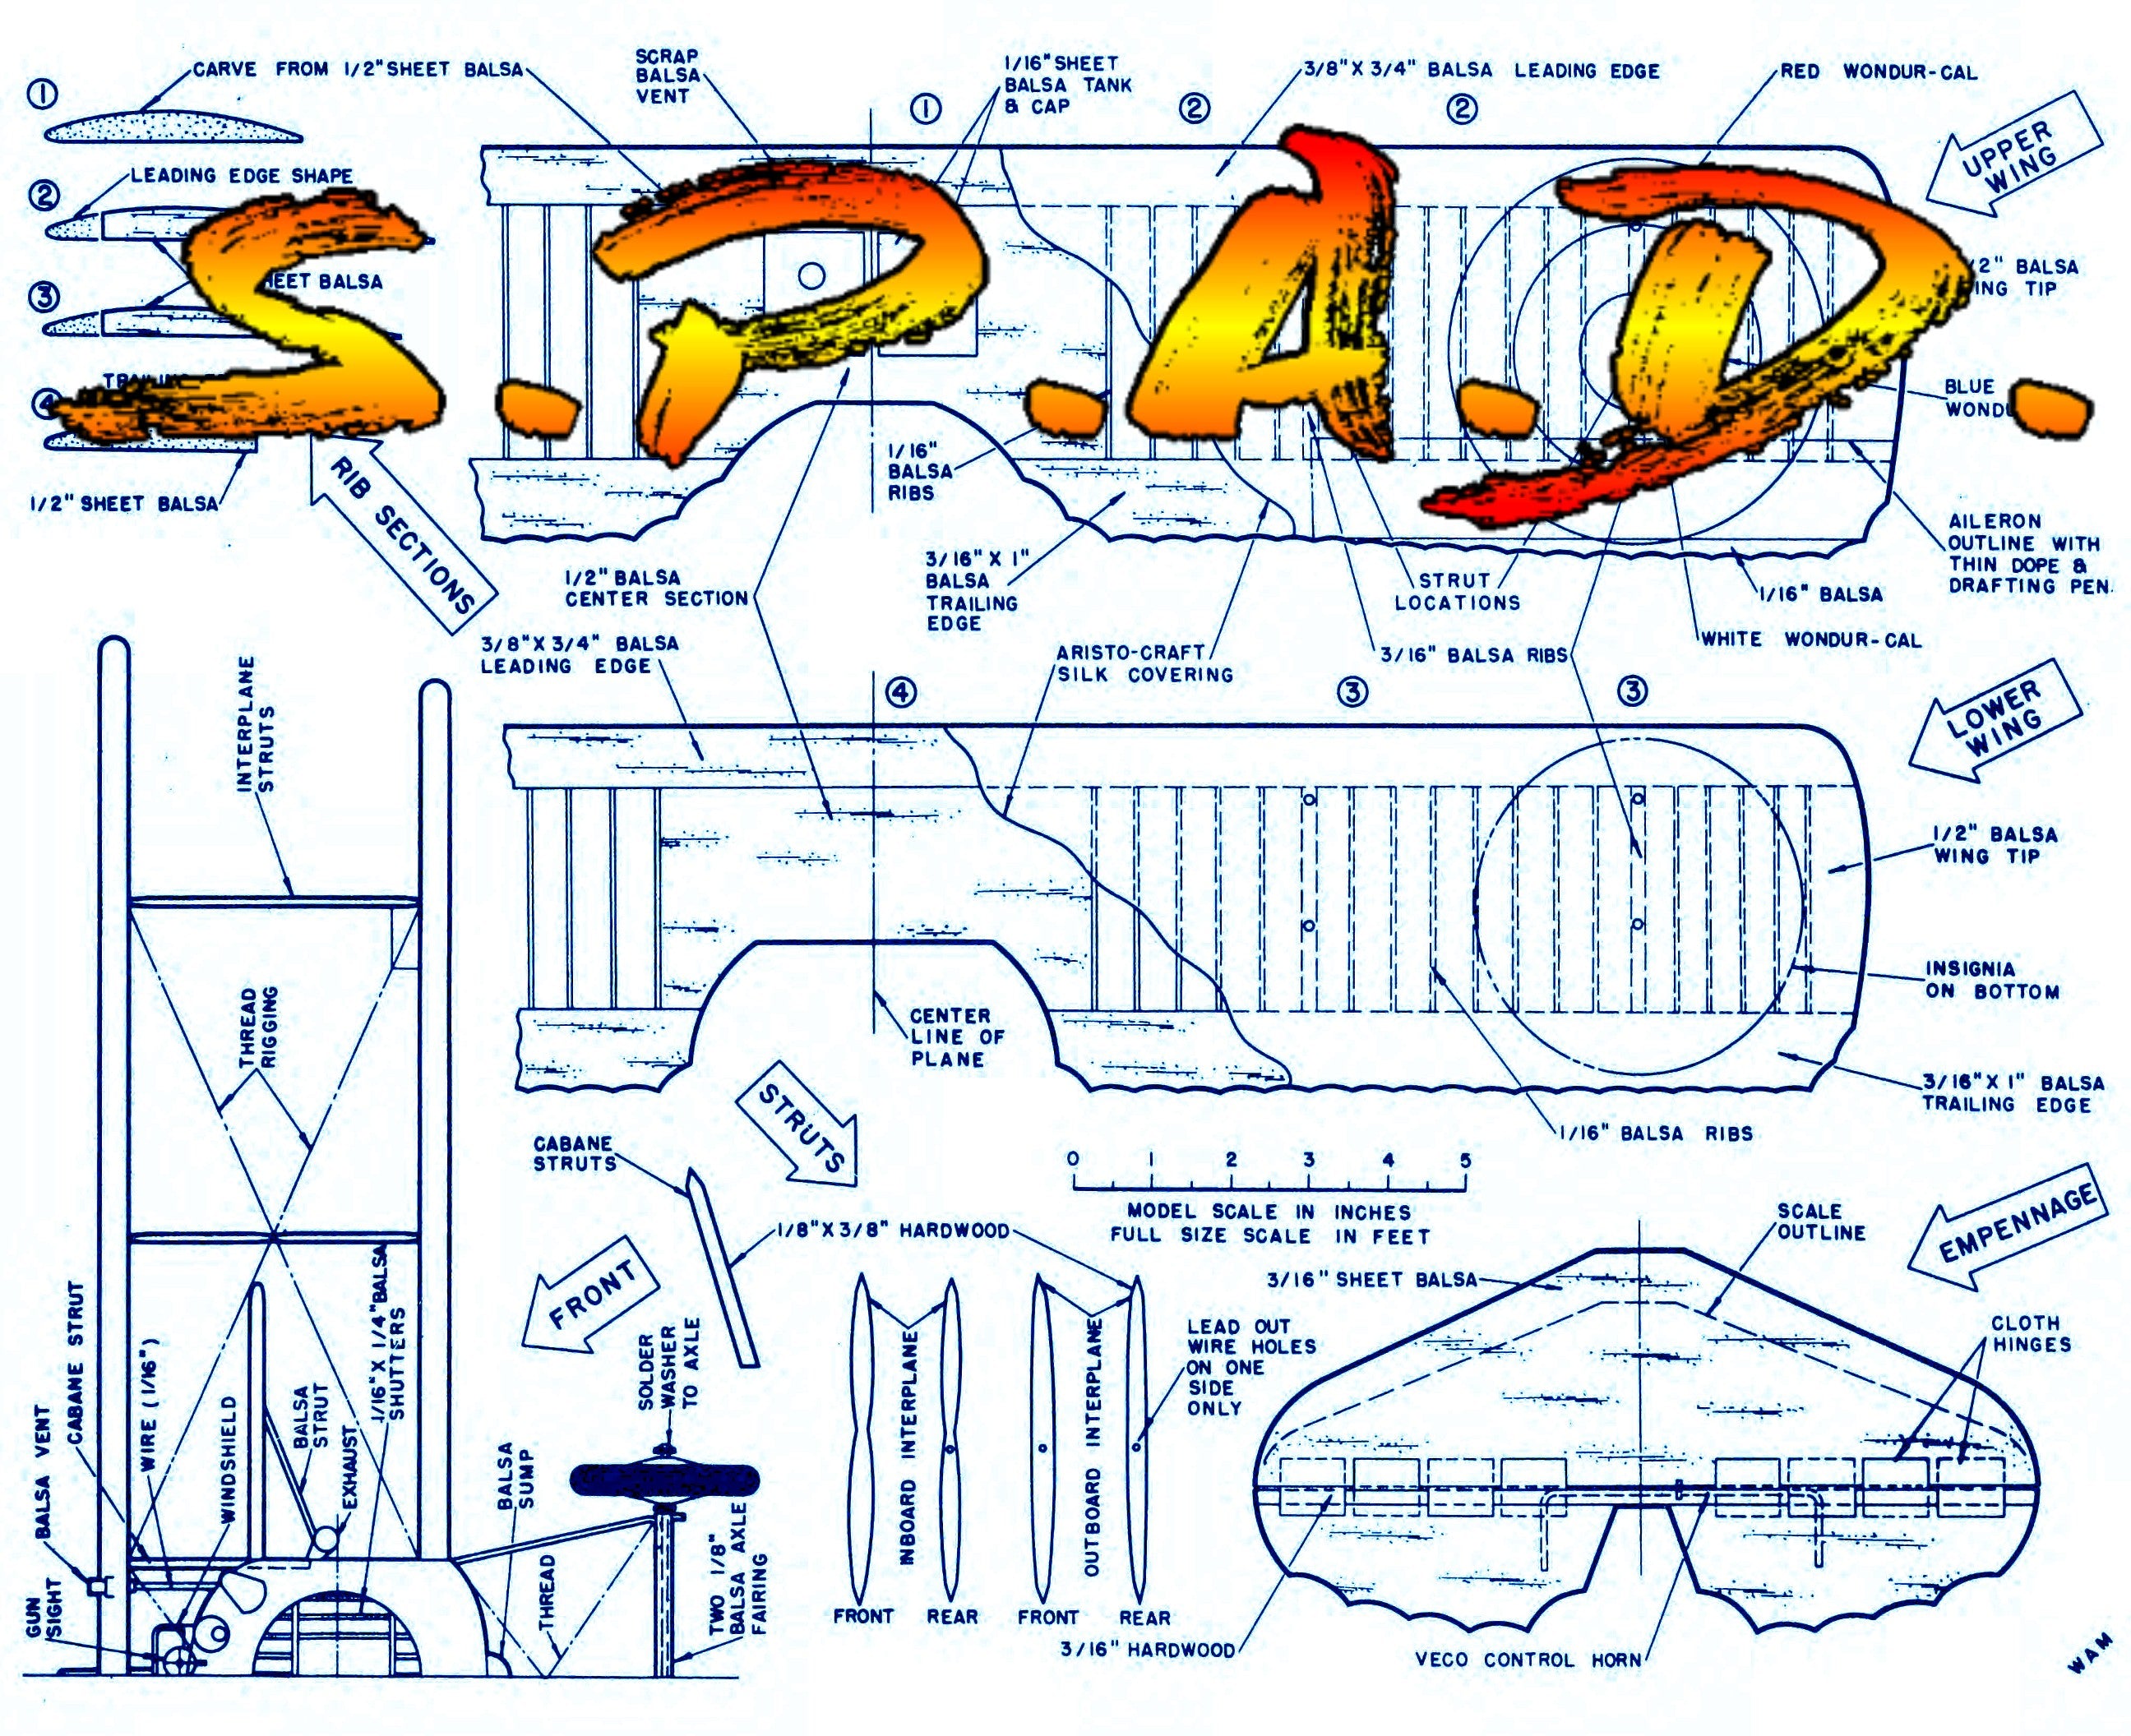 full size printed plans control line  scale 1”=1 foot s.p.a.d. wingspan 26  inches  engine .14 to .29